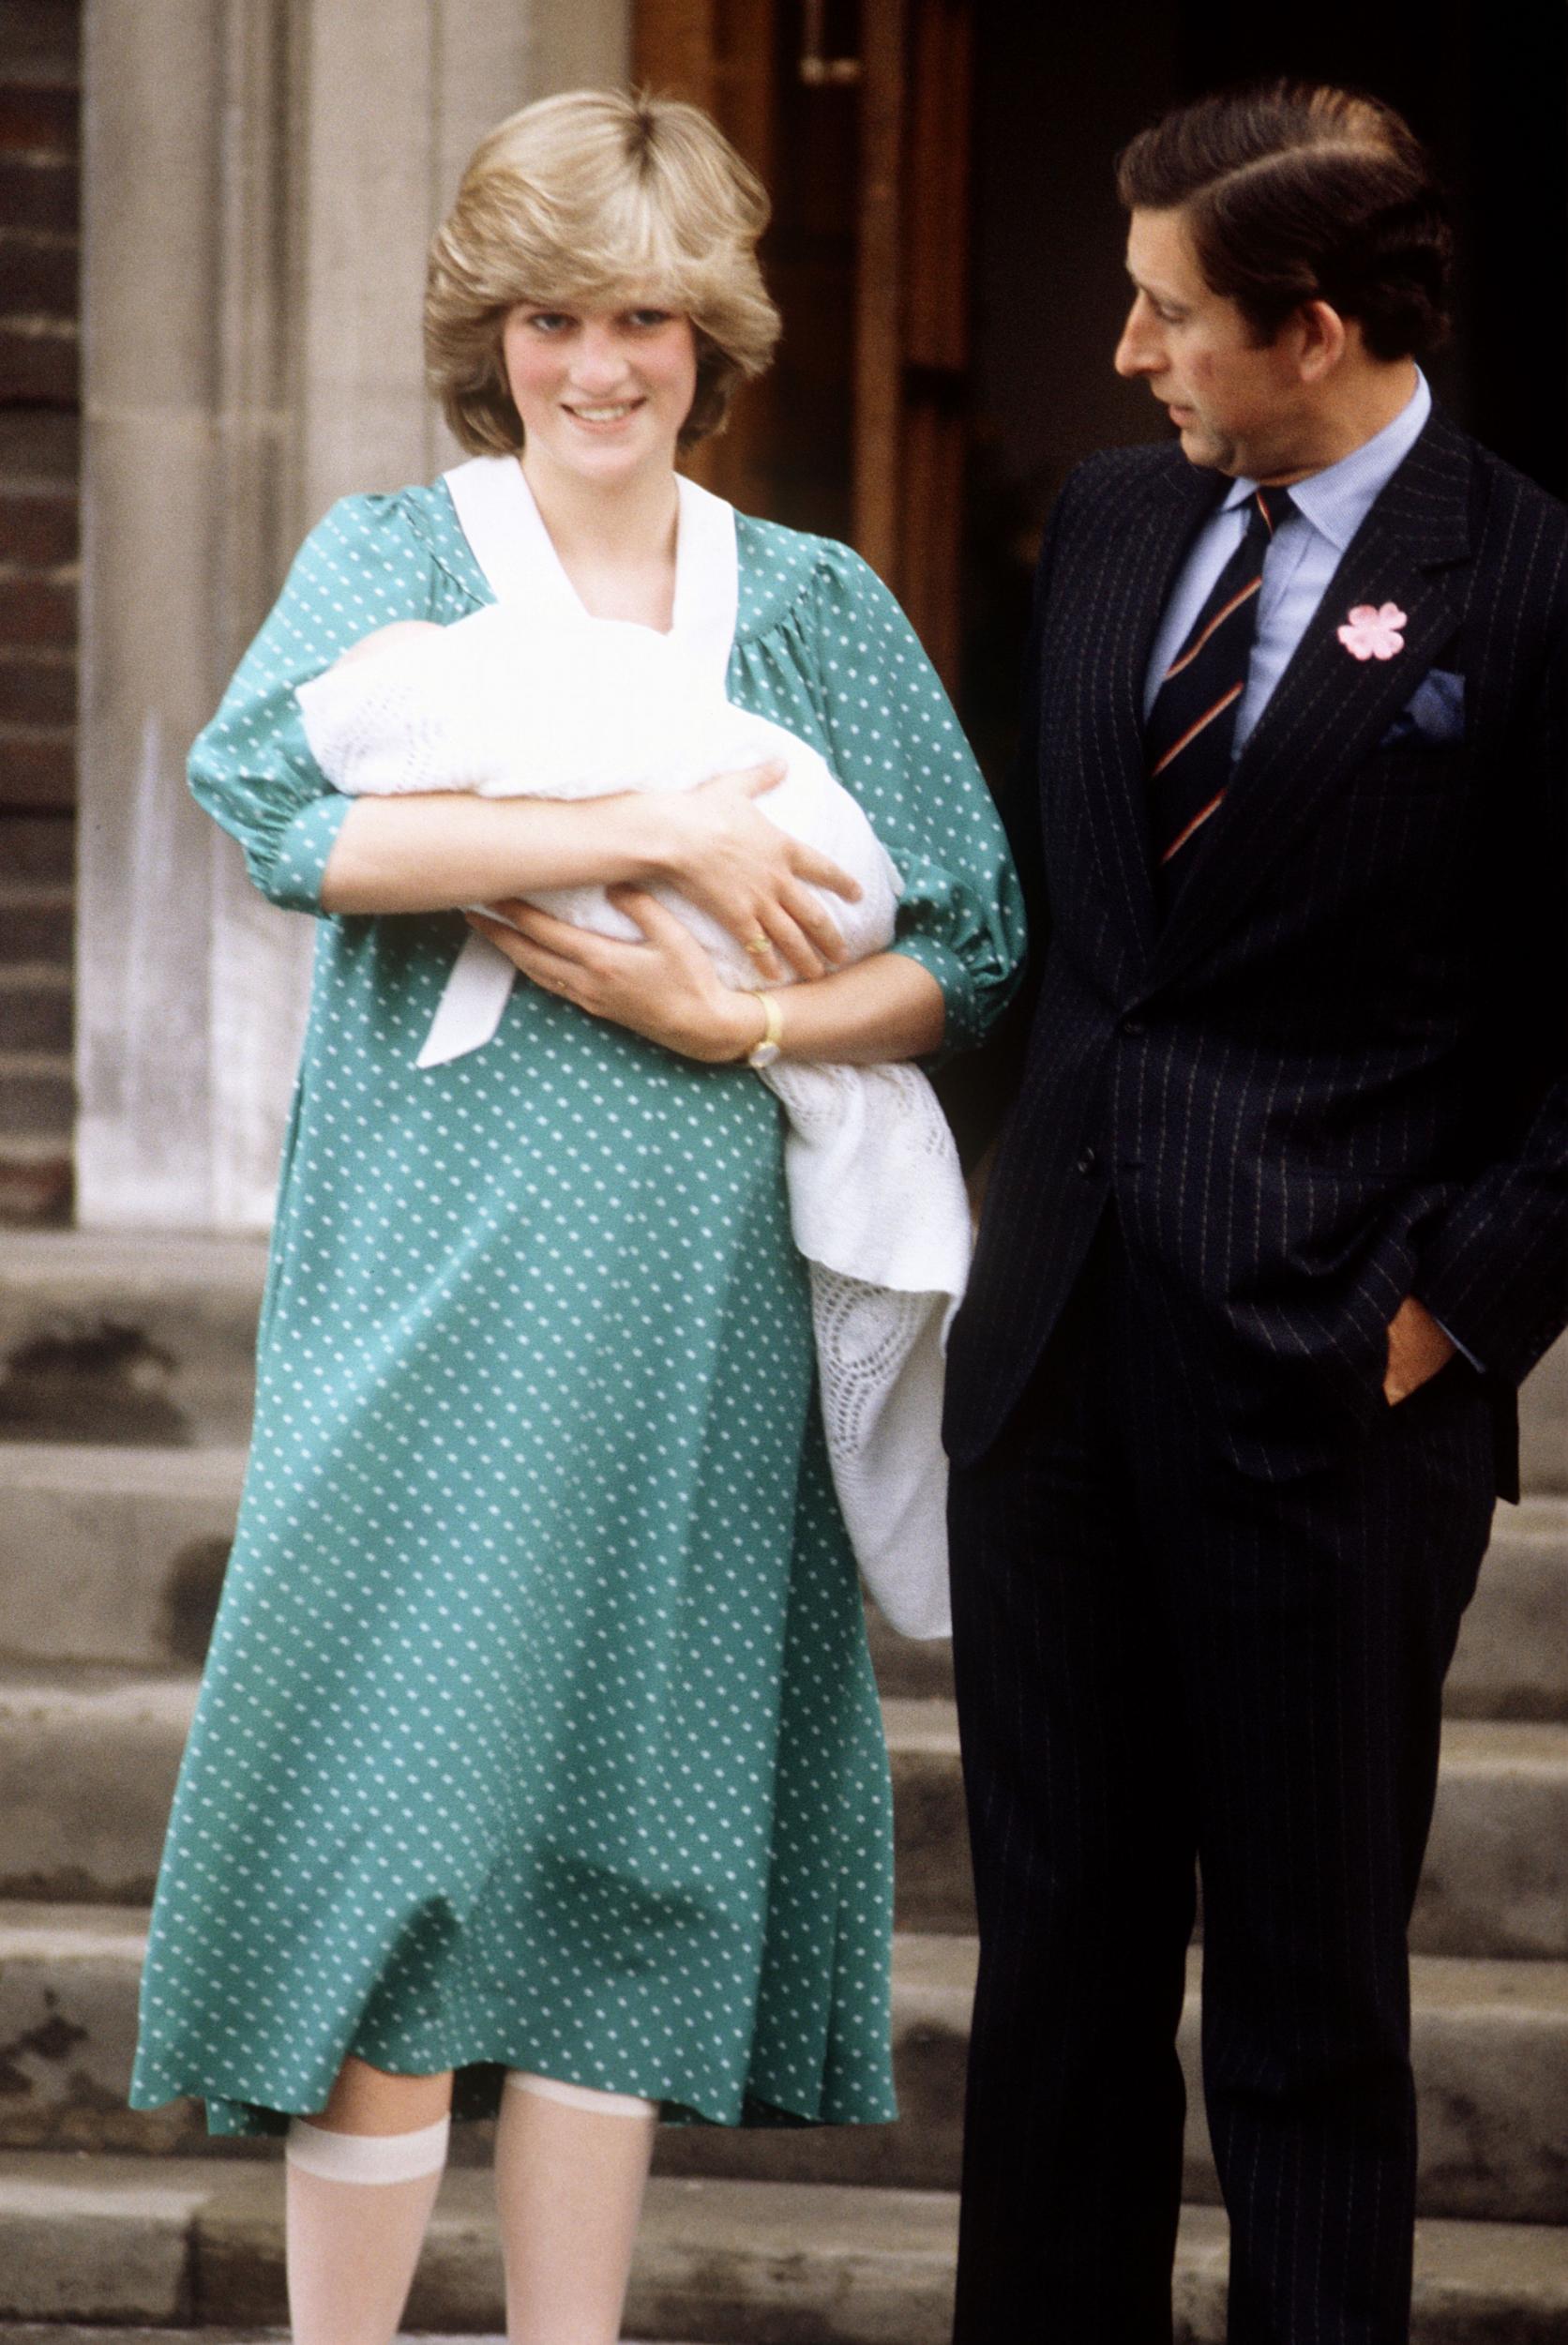 Princess Diana and Prince Charles pictured leaving St Mary’s hospital in London with their first son, Prince William, in 1982. Diana wore a statement green polka dot dress with a white Peter Pan collar. The Duchess of Cambridge famously referenced this look when she chose a light blue polka-dot dress by British designer Jenny Packham for the moment she stepped out of the same hospital holding her first child with Prince William, Prince George, in 2013.